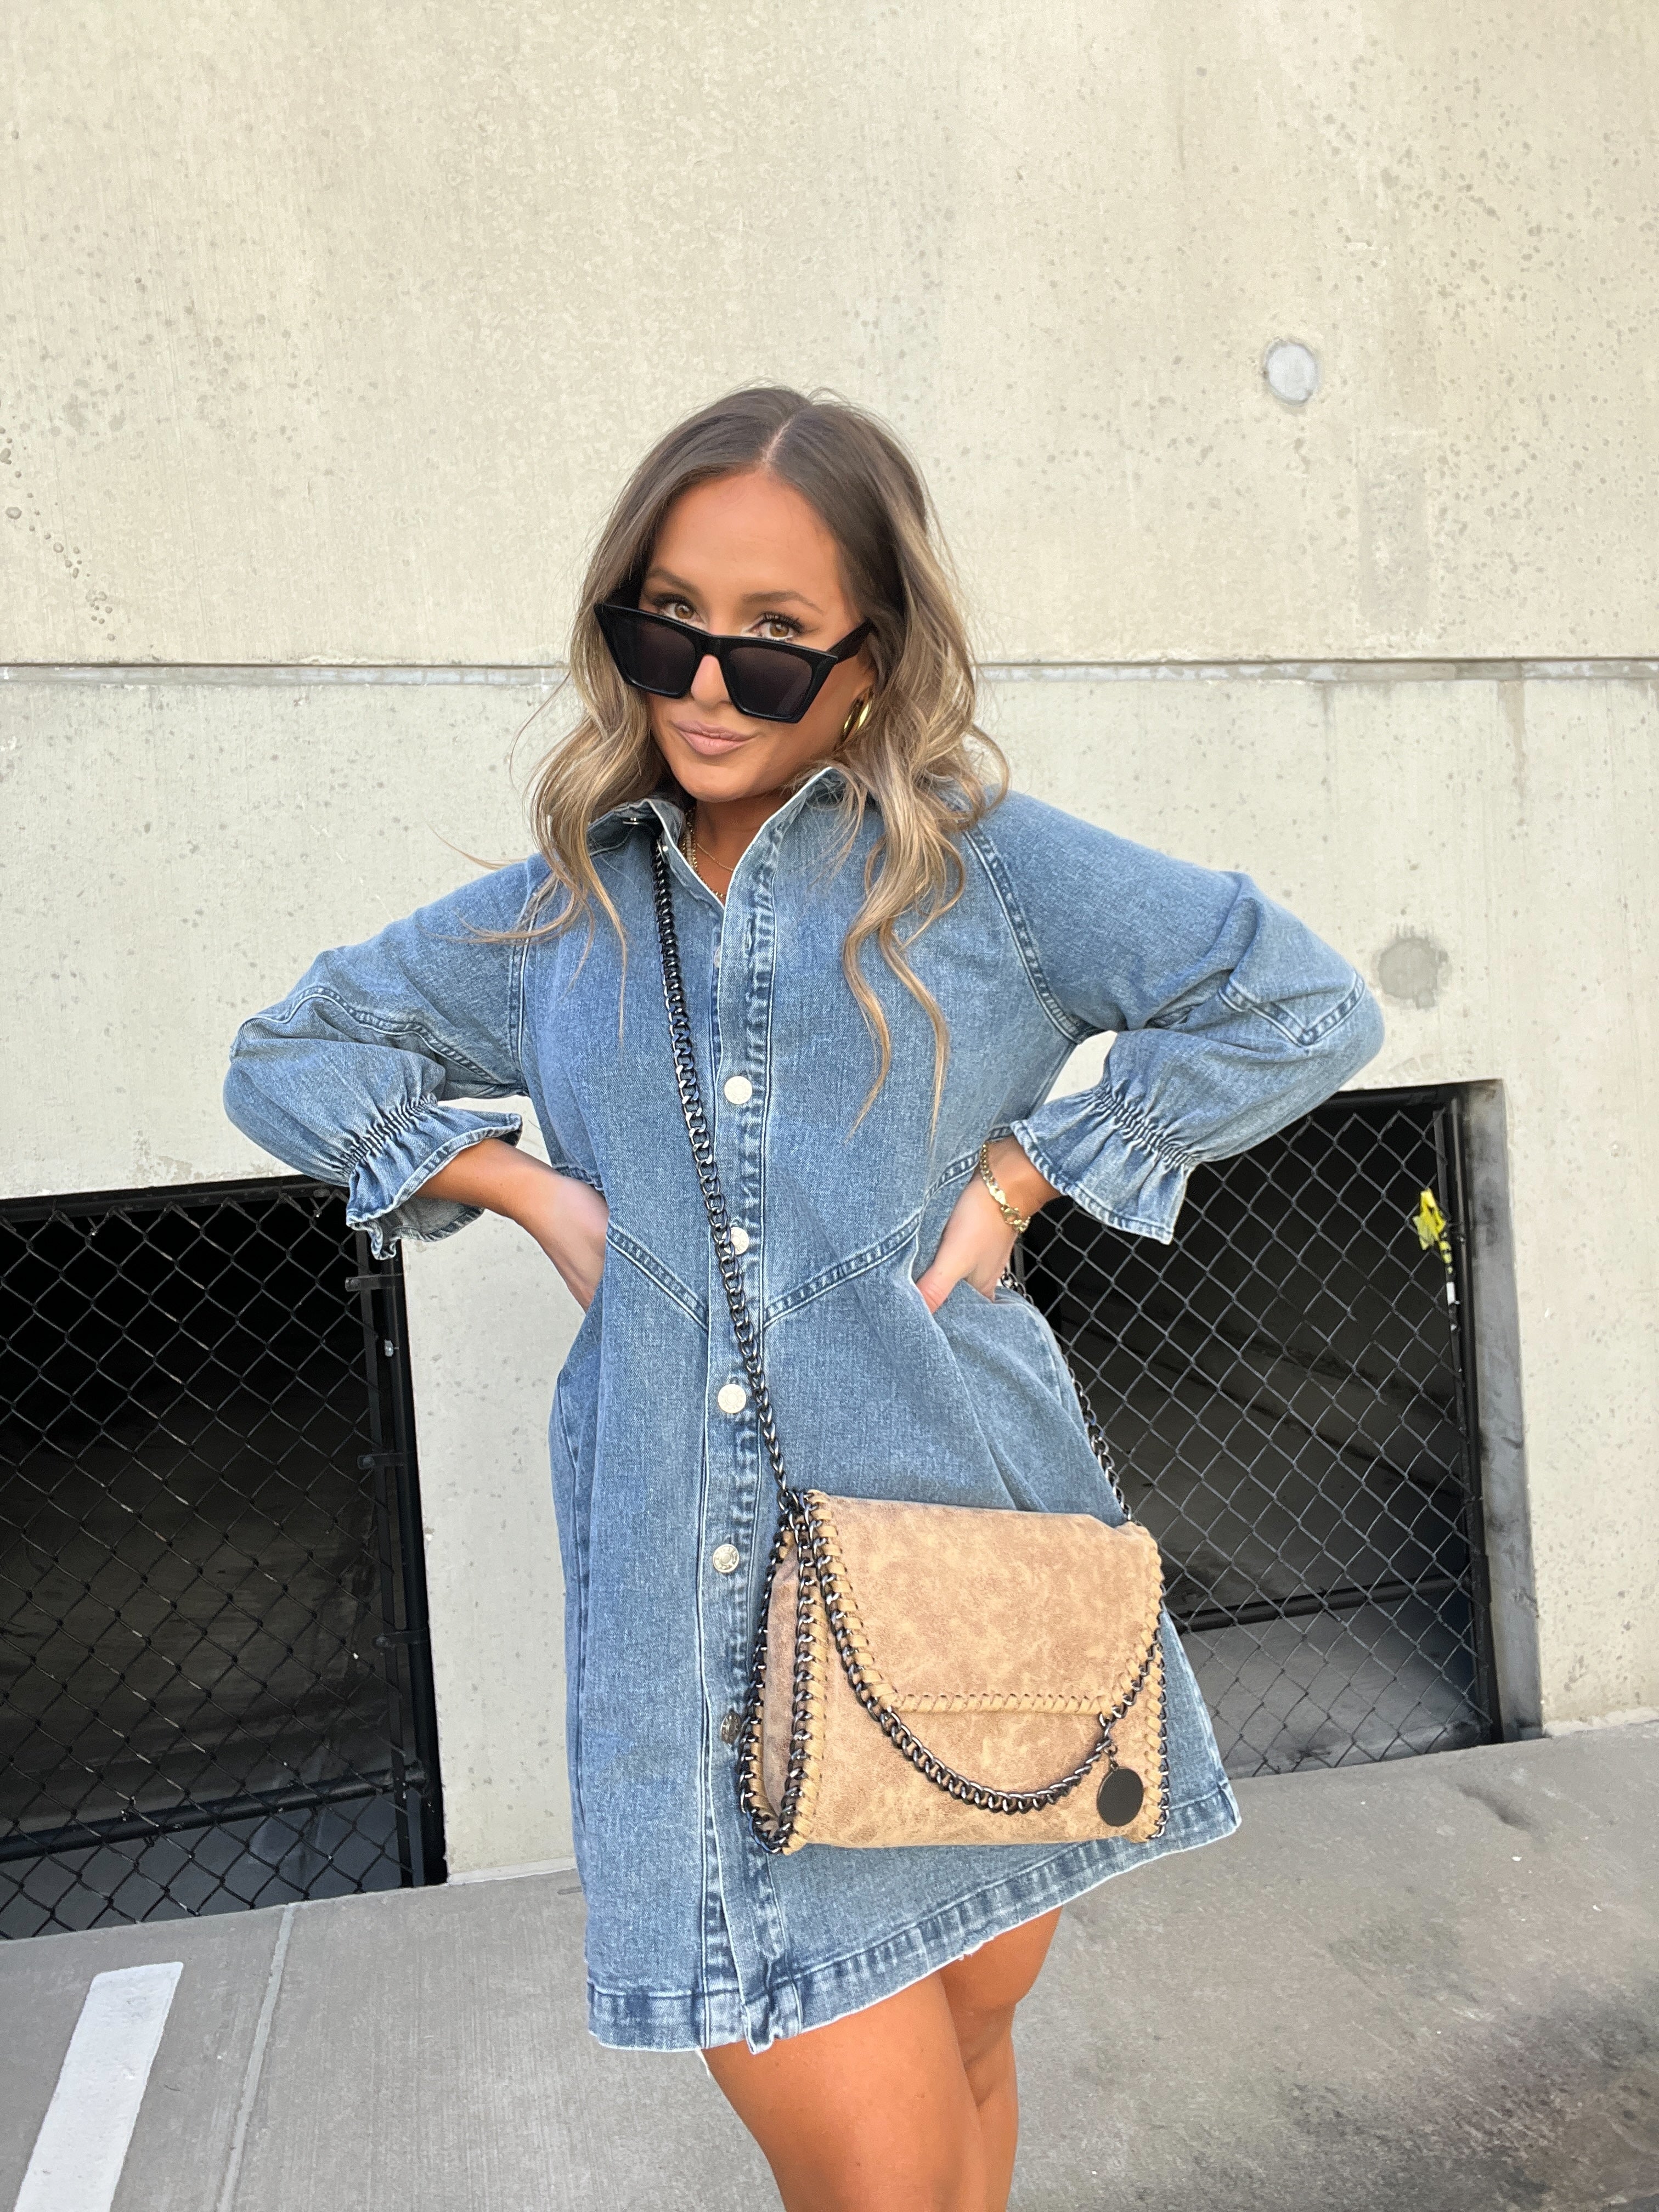 14 Denim Dresses We're In Love With For Summer - Society19